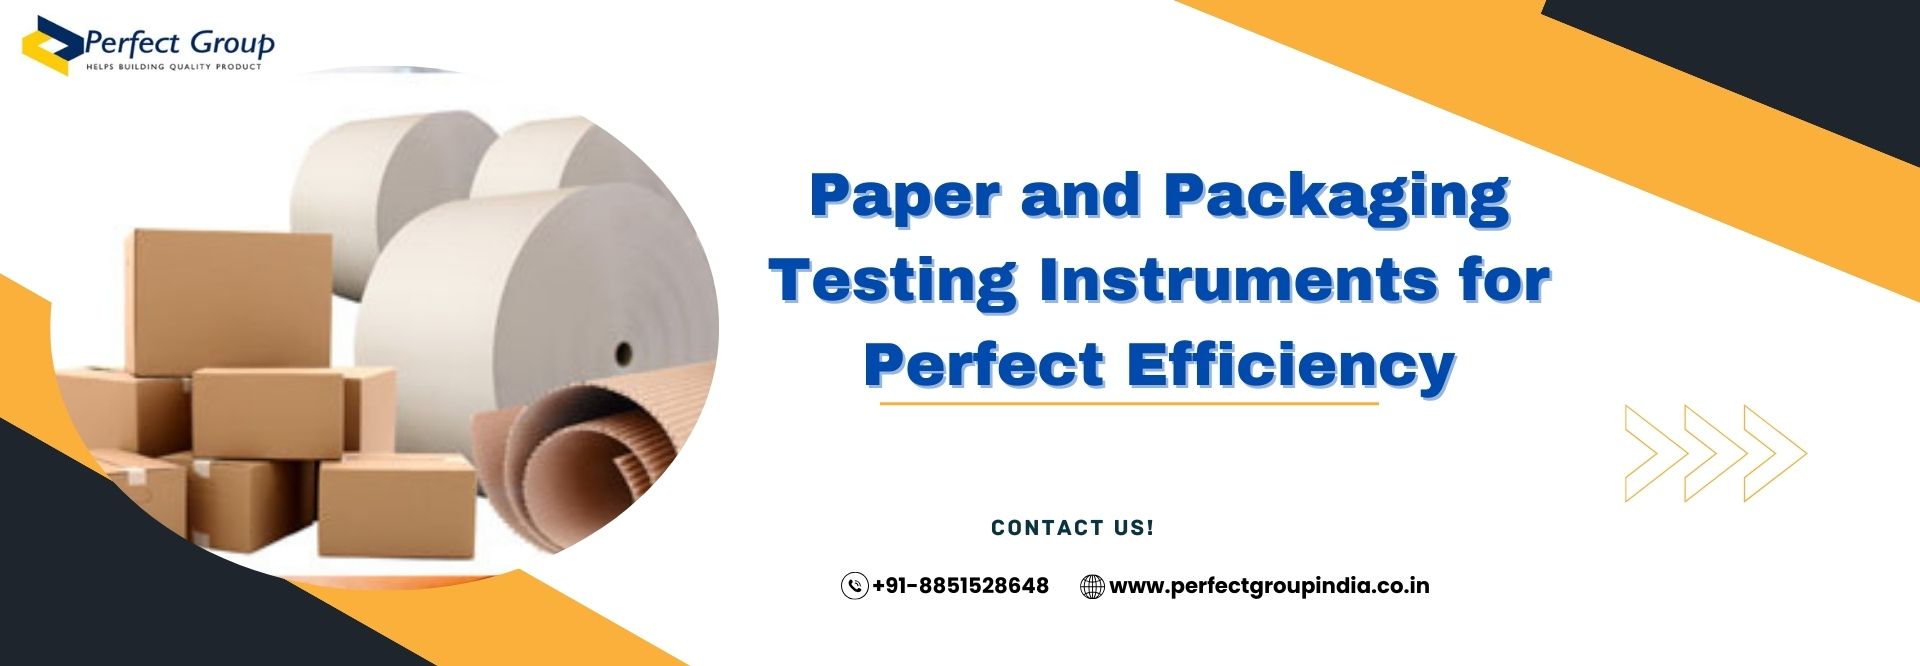 Paper and Packaging Testing Instruments for Perfect Efficiency